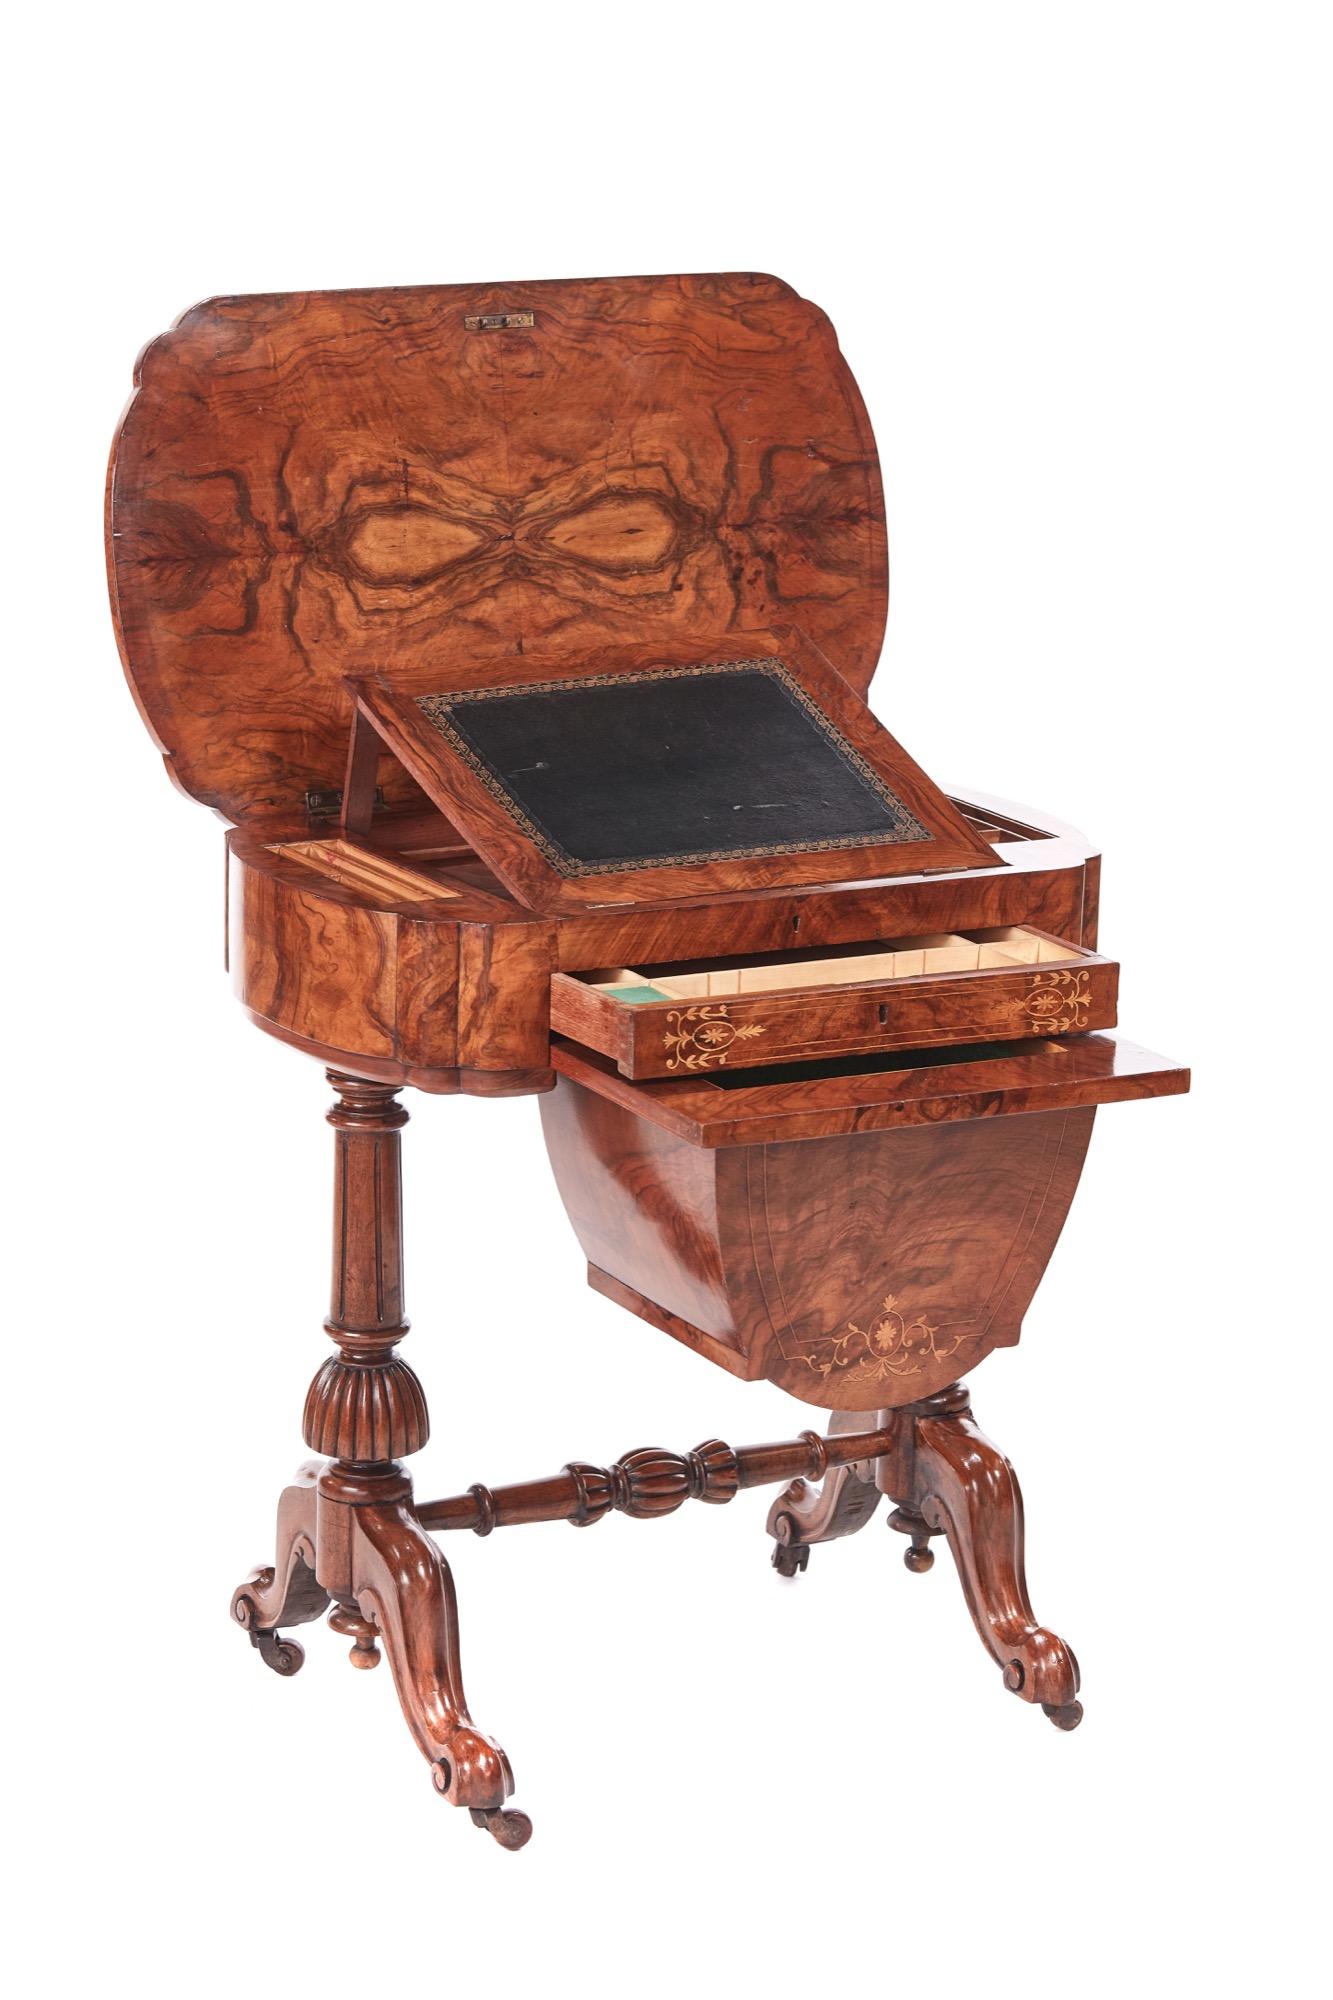 This antique early Victorian 19th century inlaid burr walnut writing or sewing table is an exquisite example having a superior quality burr walnut lift up top with beautiful satinwood inlay with a fitted writing slope inside, one frieze fitted